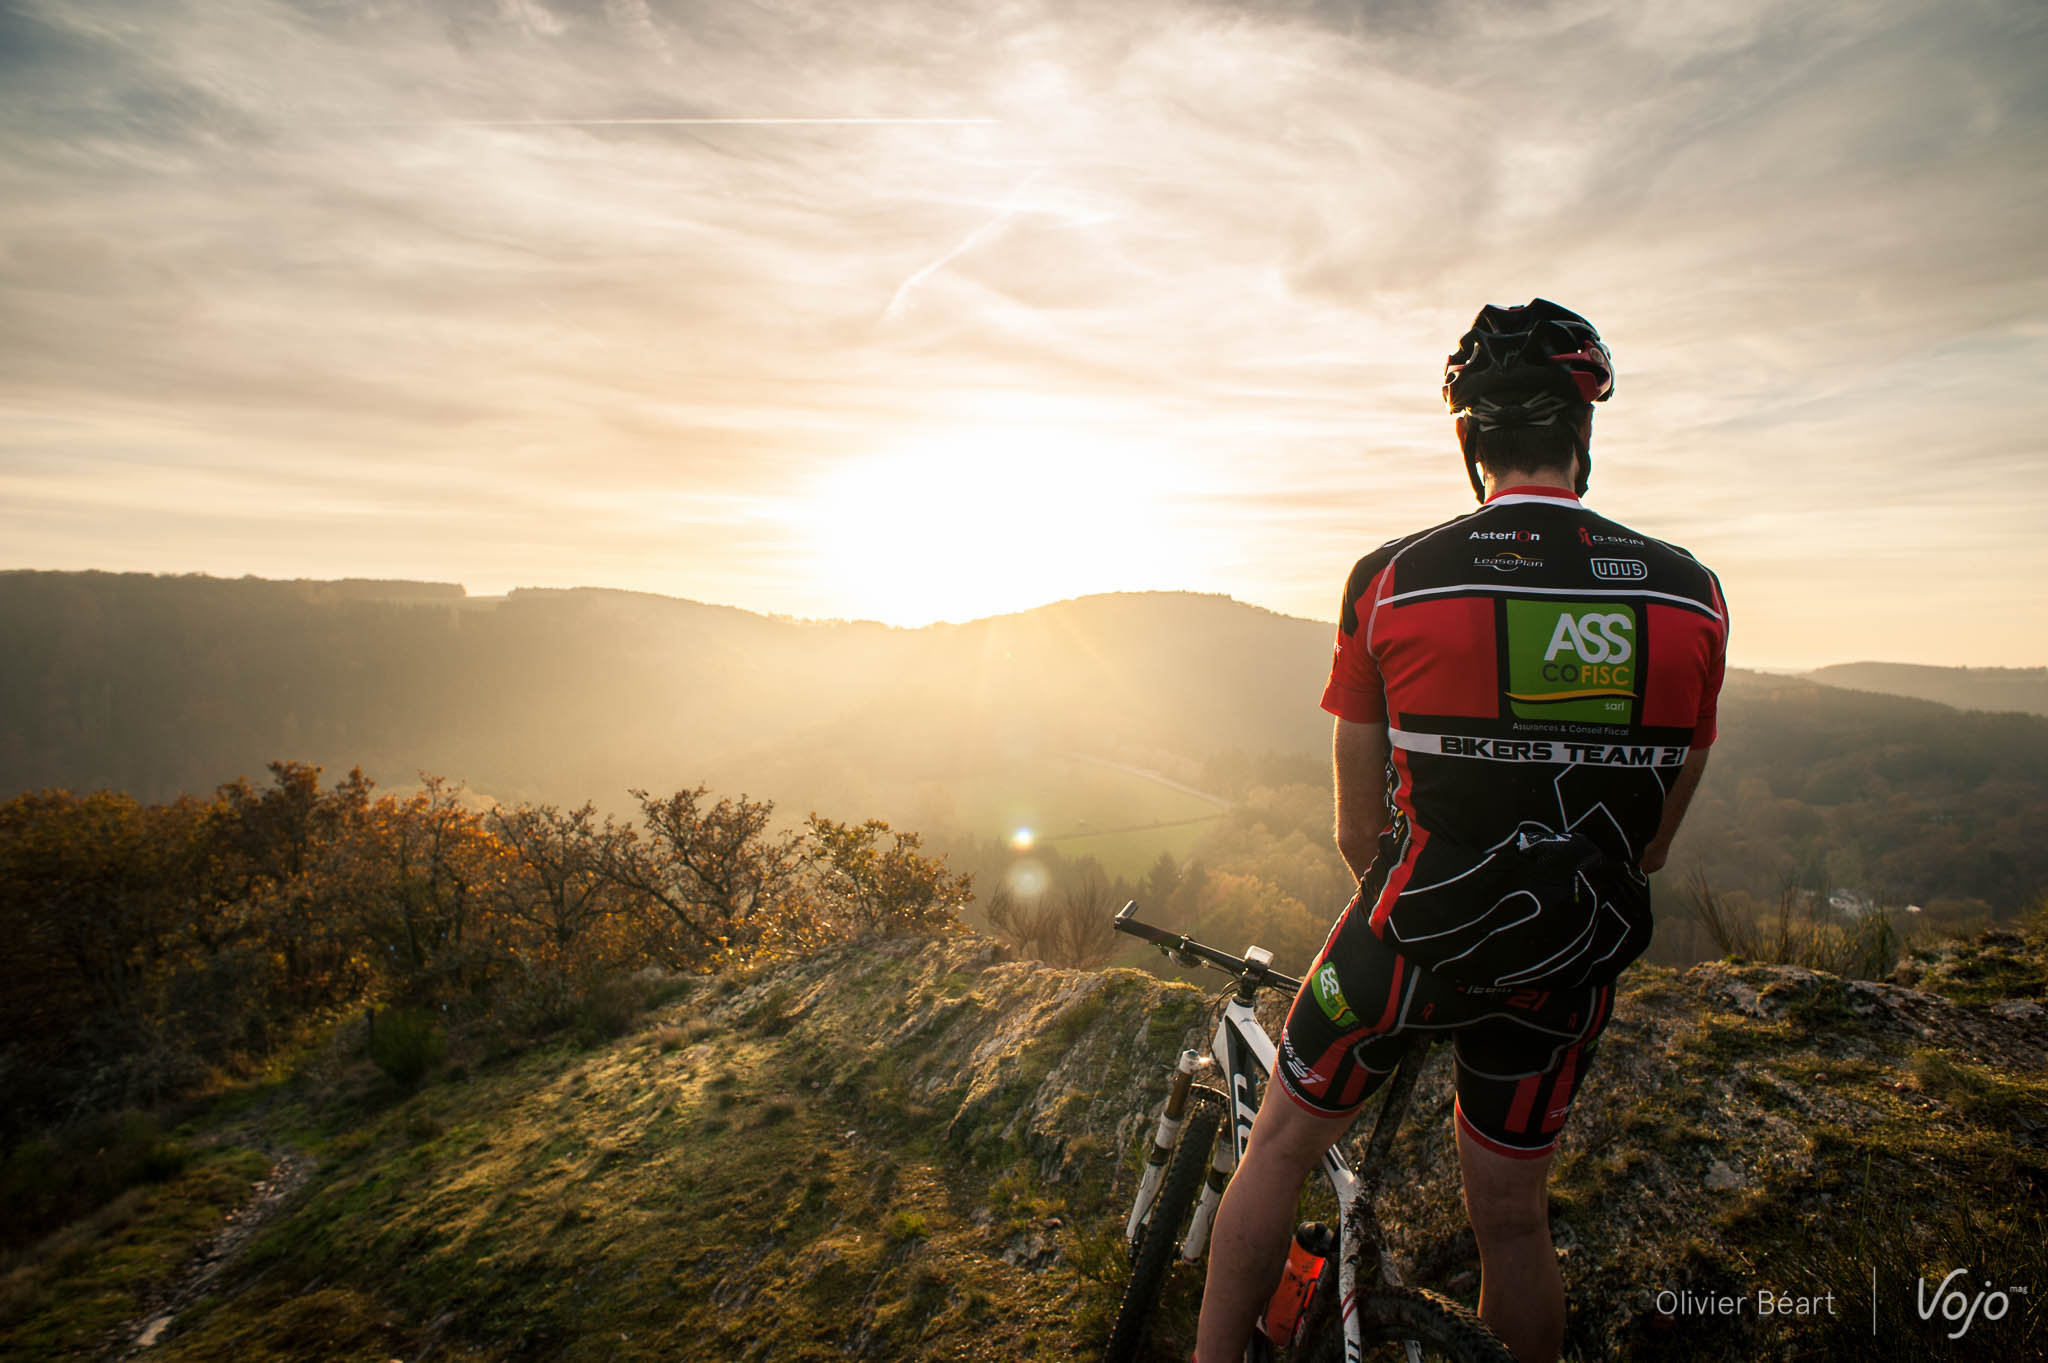 Vallée_Sure_Luxembourg_EpicBikersTeam21_Copyright_OBeart_VojoMag-1